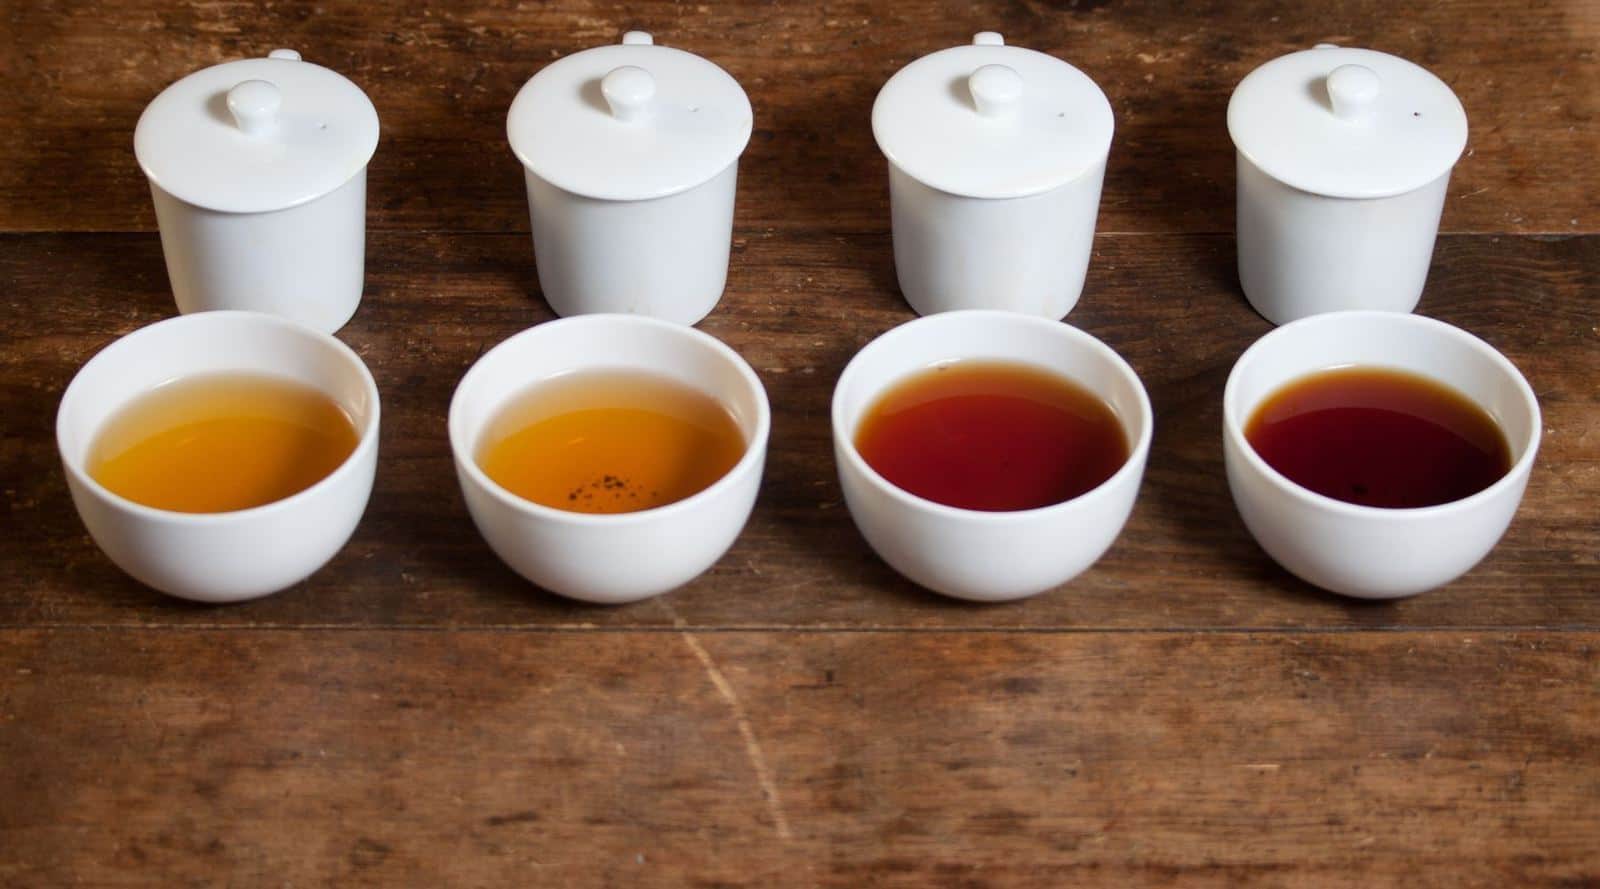 tea cupping: what is it?